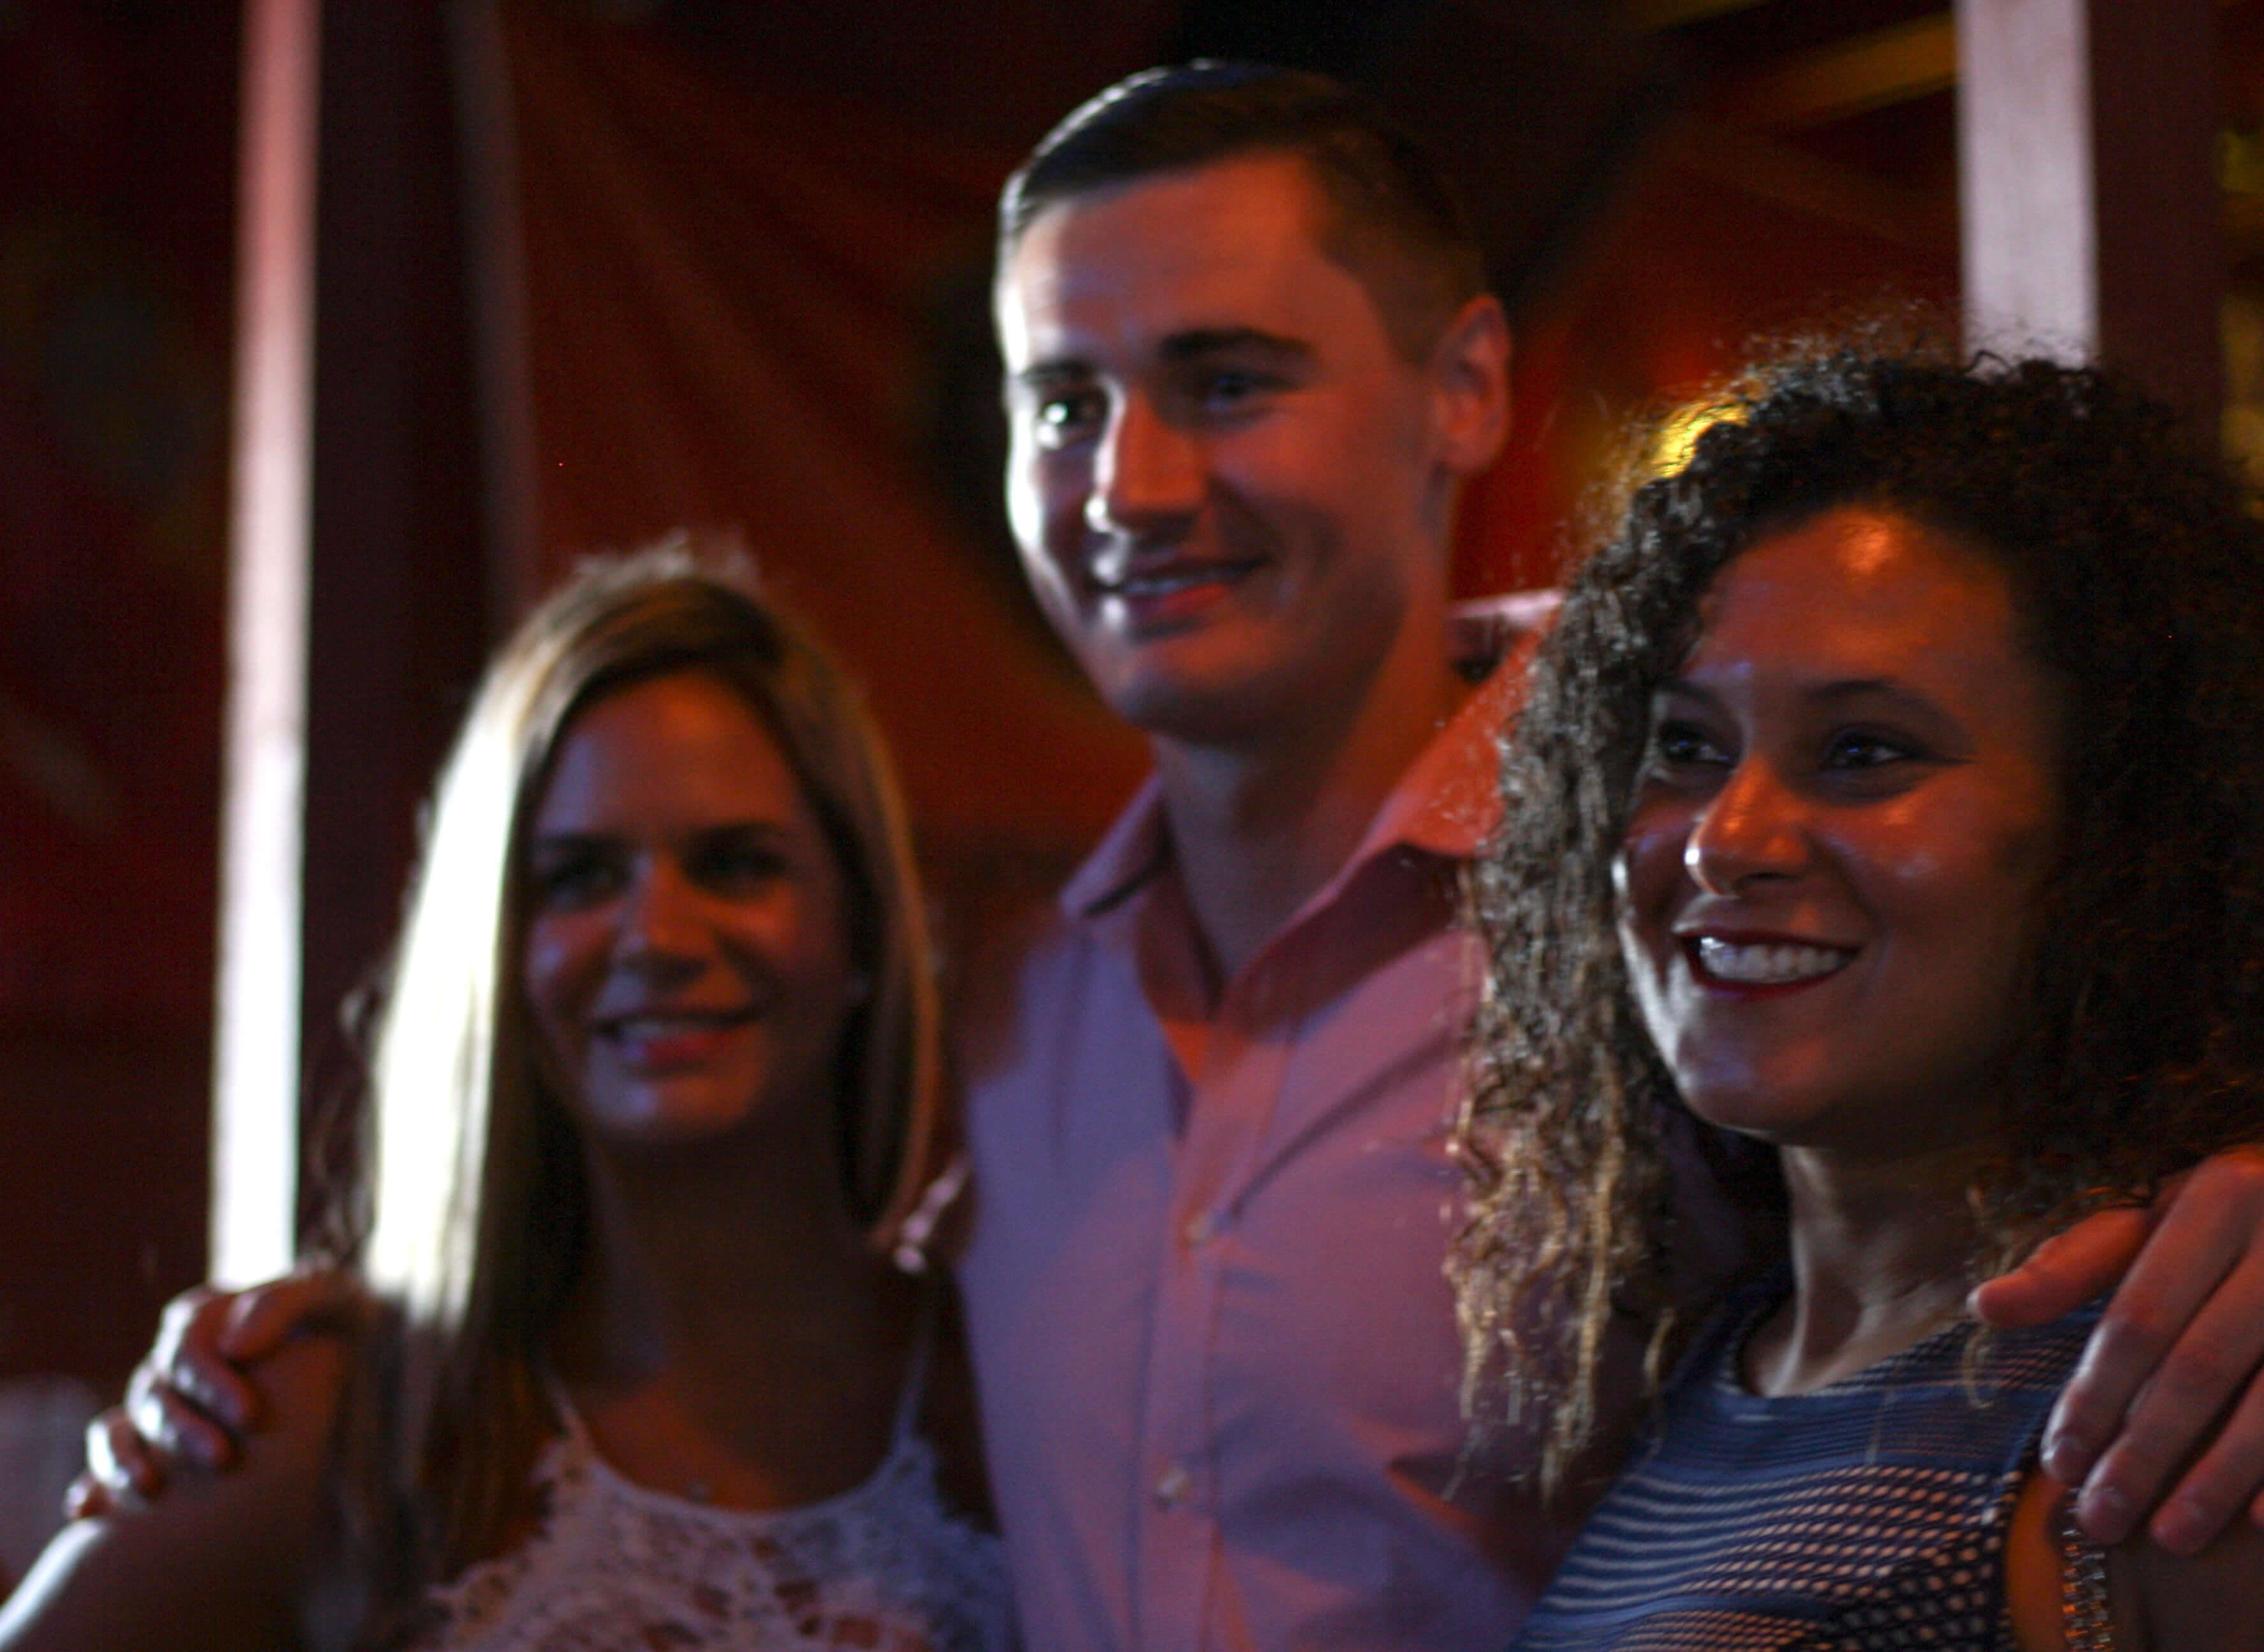 Local bachelors and bachelorettes were auctioned off with date packages to benefit six local charities at the Savannah Jaycees fourth annual Charity Date Night Auction at Savannah Smiles Dueling Pianos.